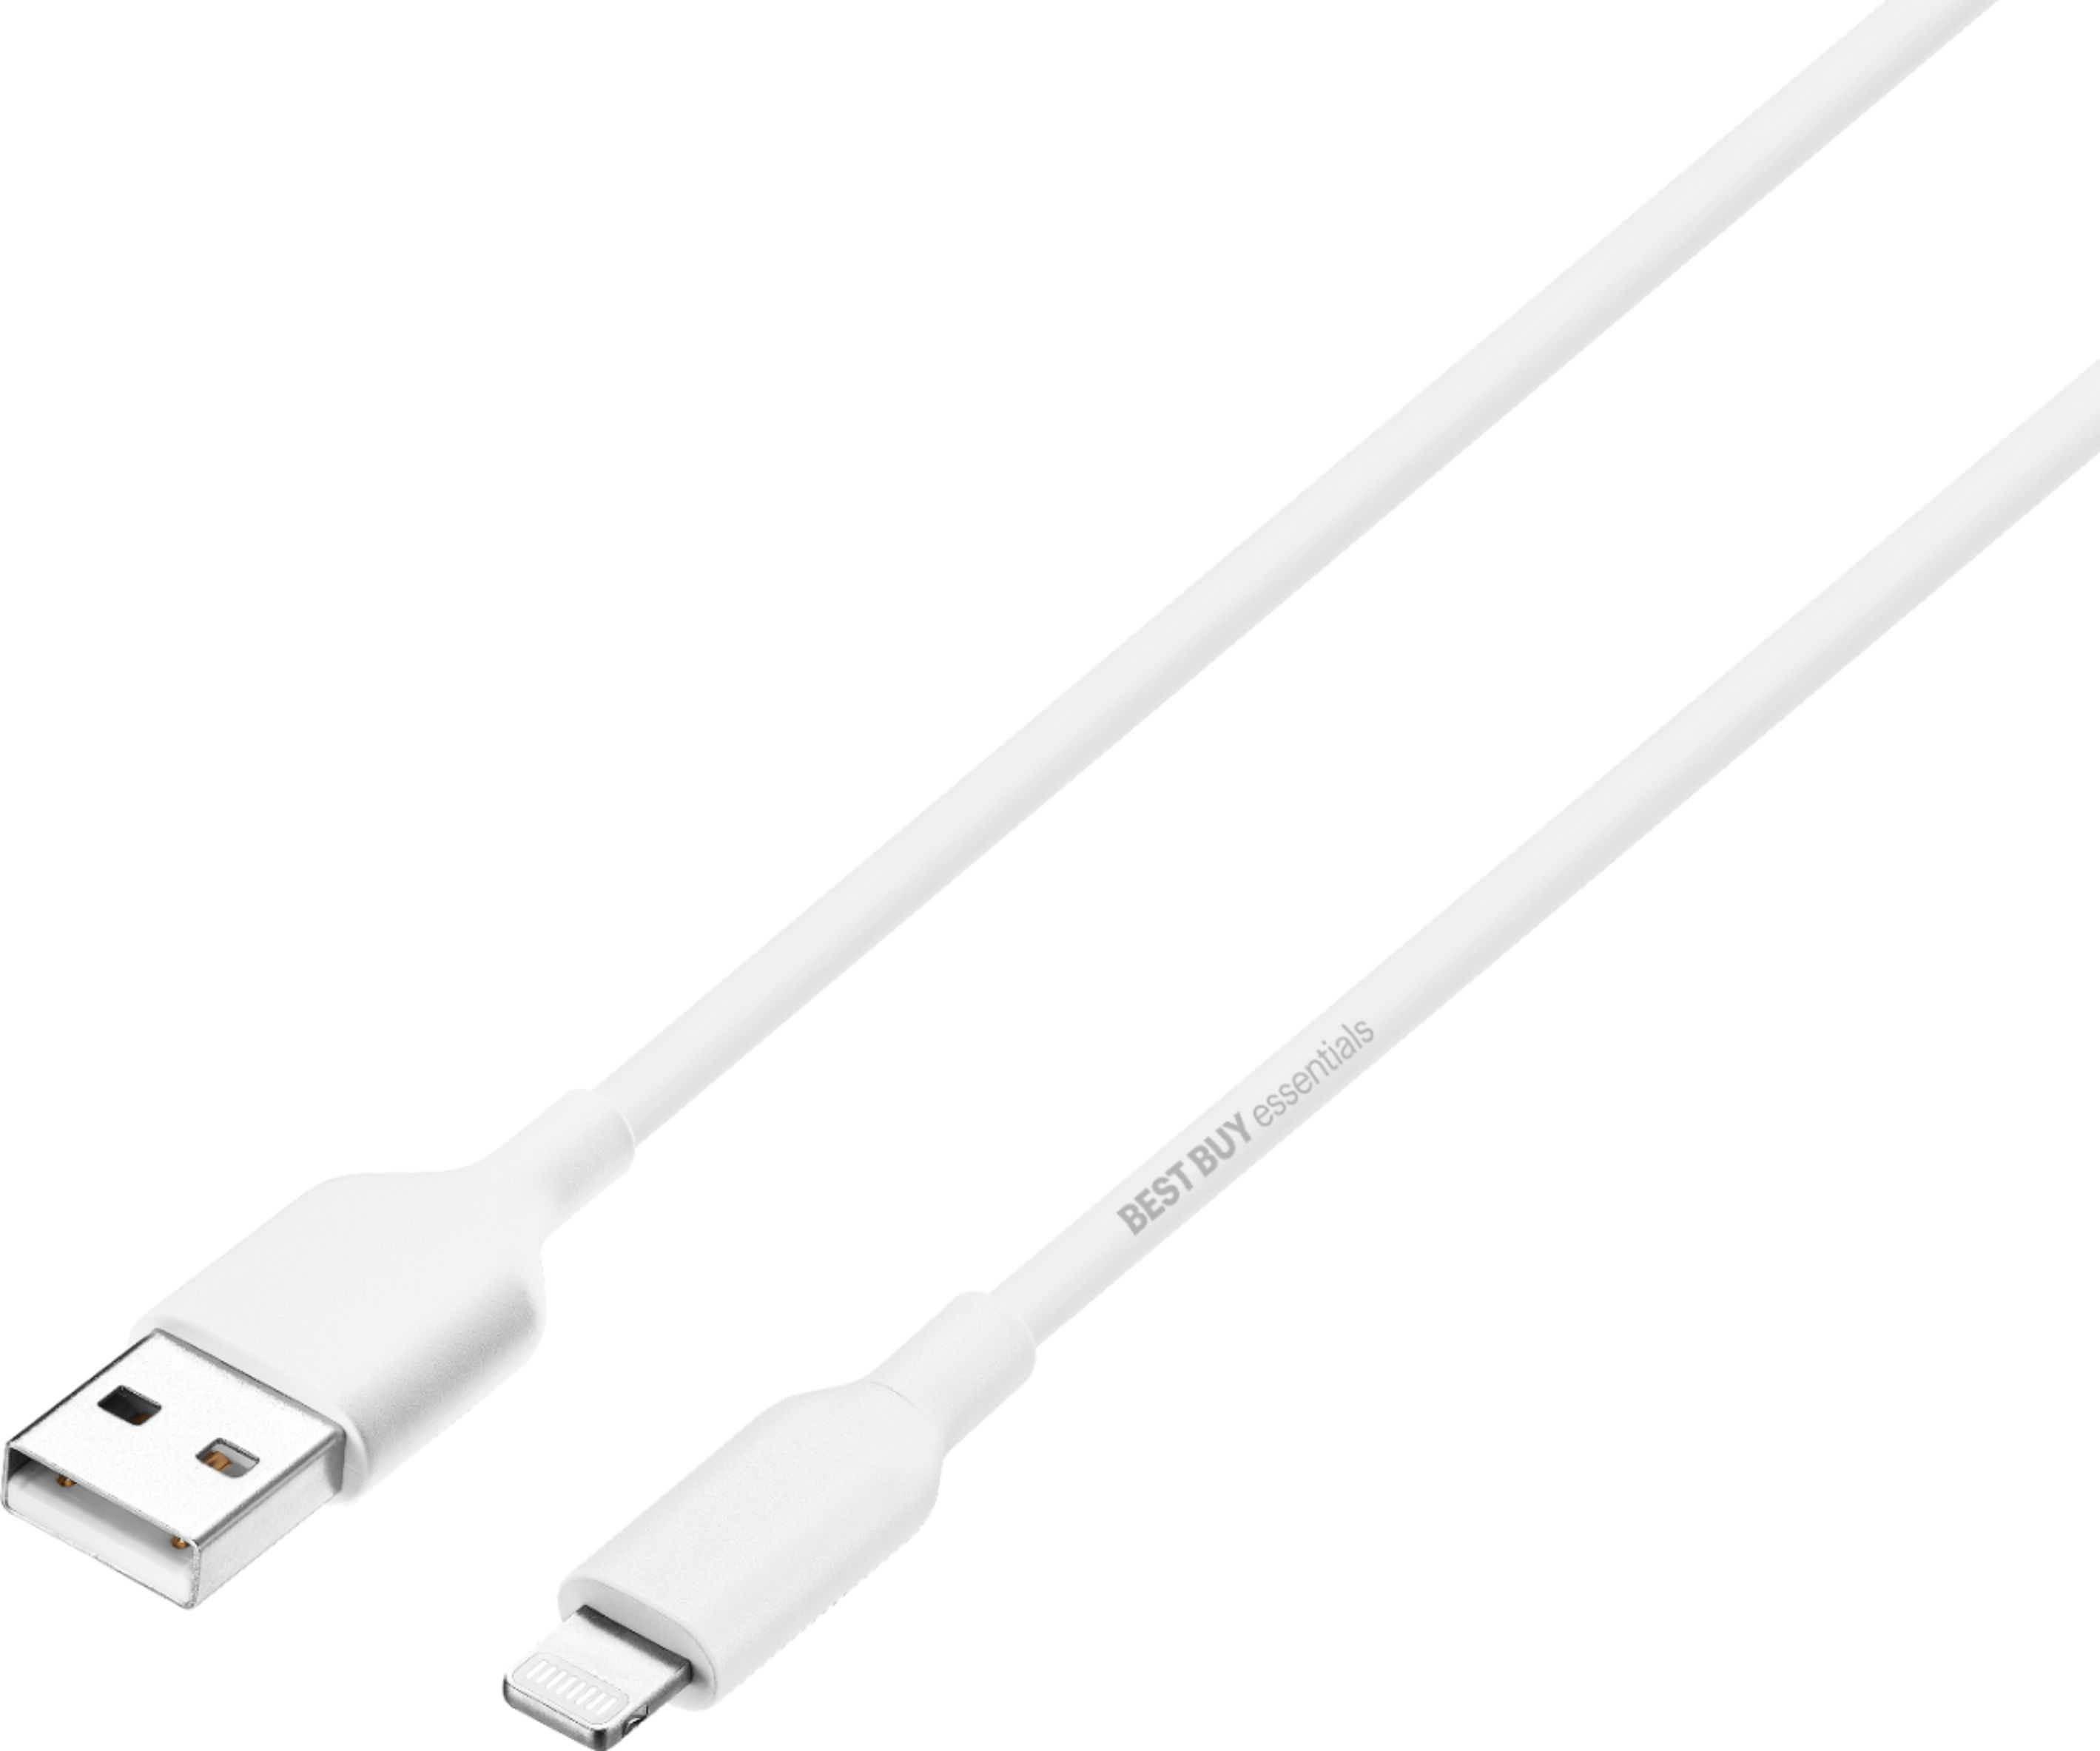 IJver Scenario ondersteuning Best Buy essentials™ 3' Lightning to USB Charge-and-Sync Cable White  BE-MLA322W - Best Buy